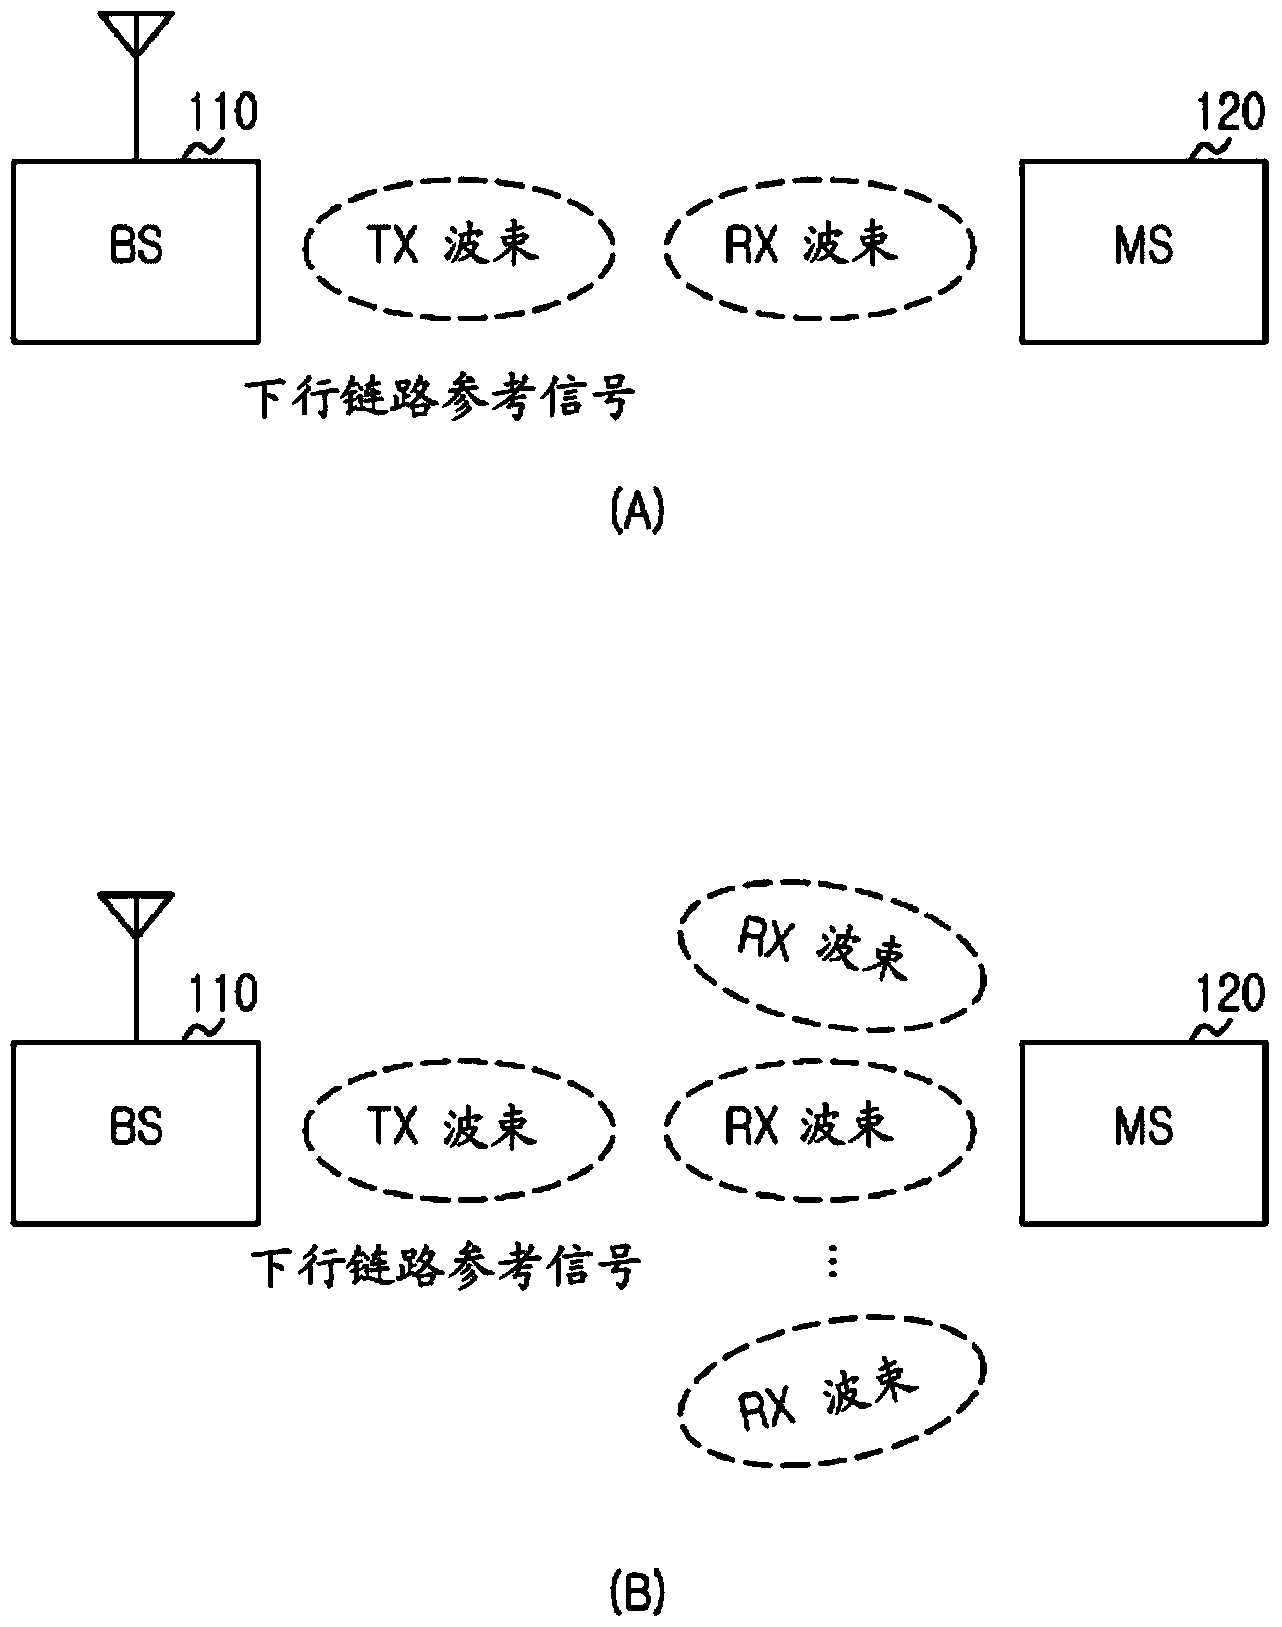 Method and apparatus for beam allocation in wireless communication system